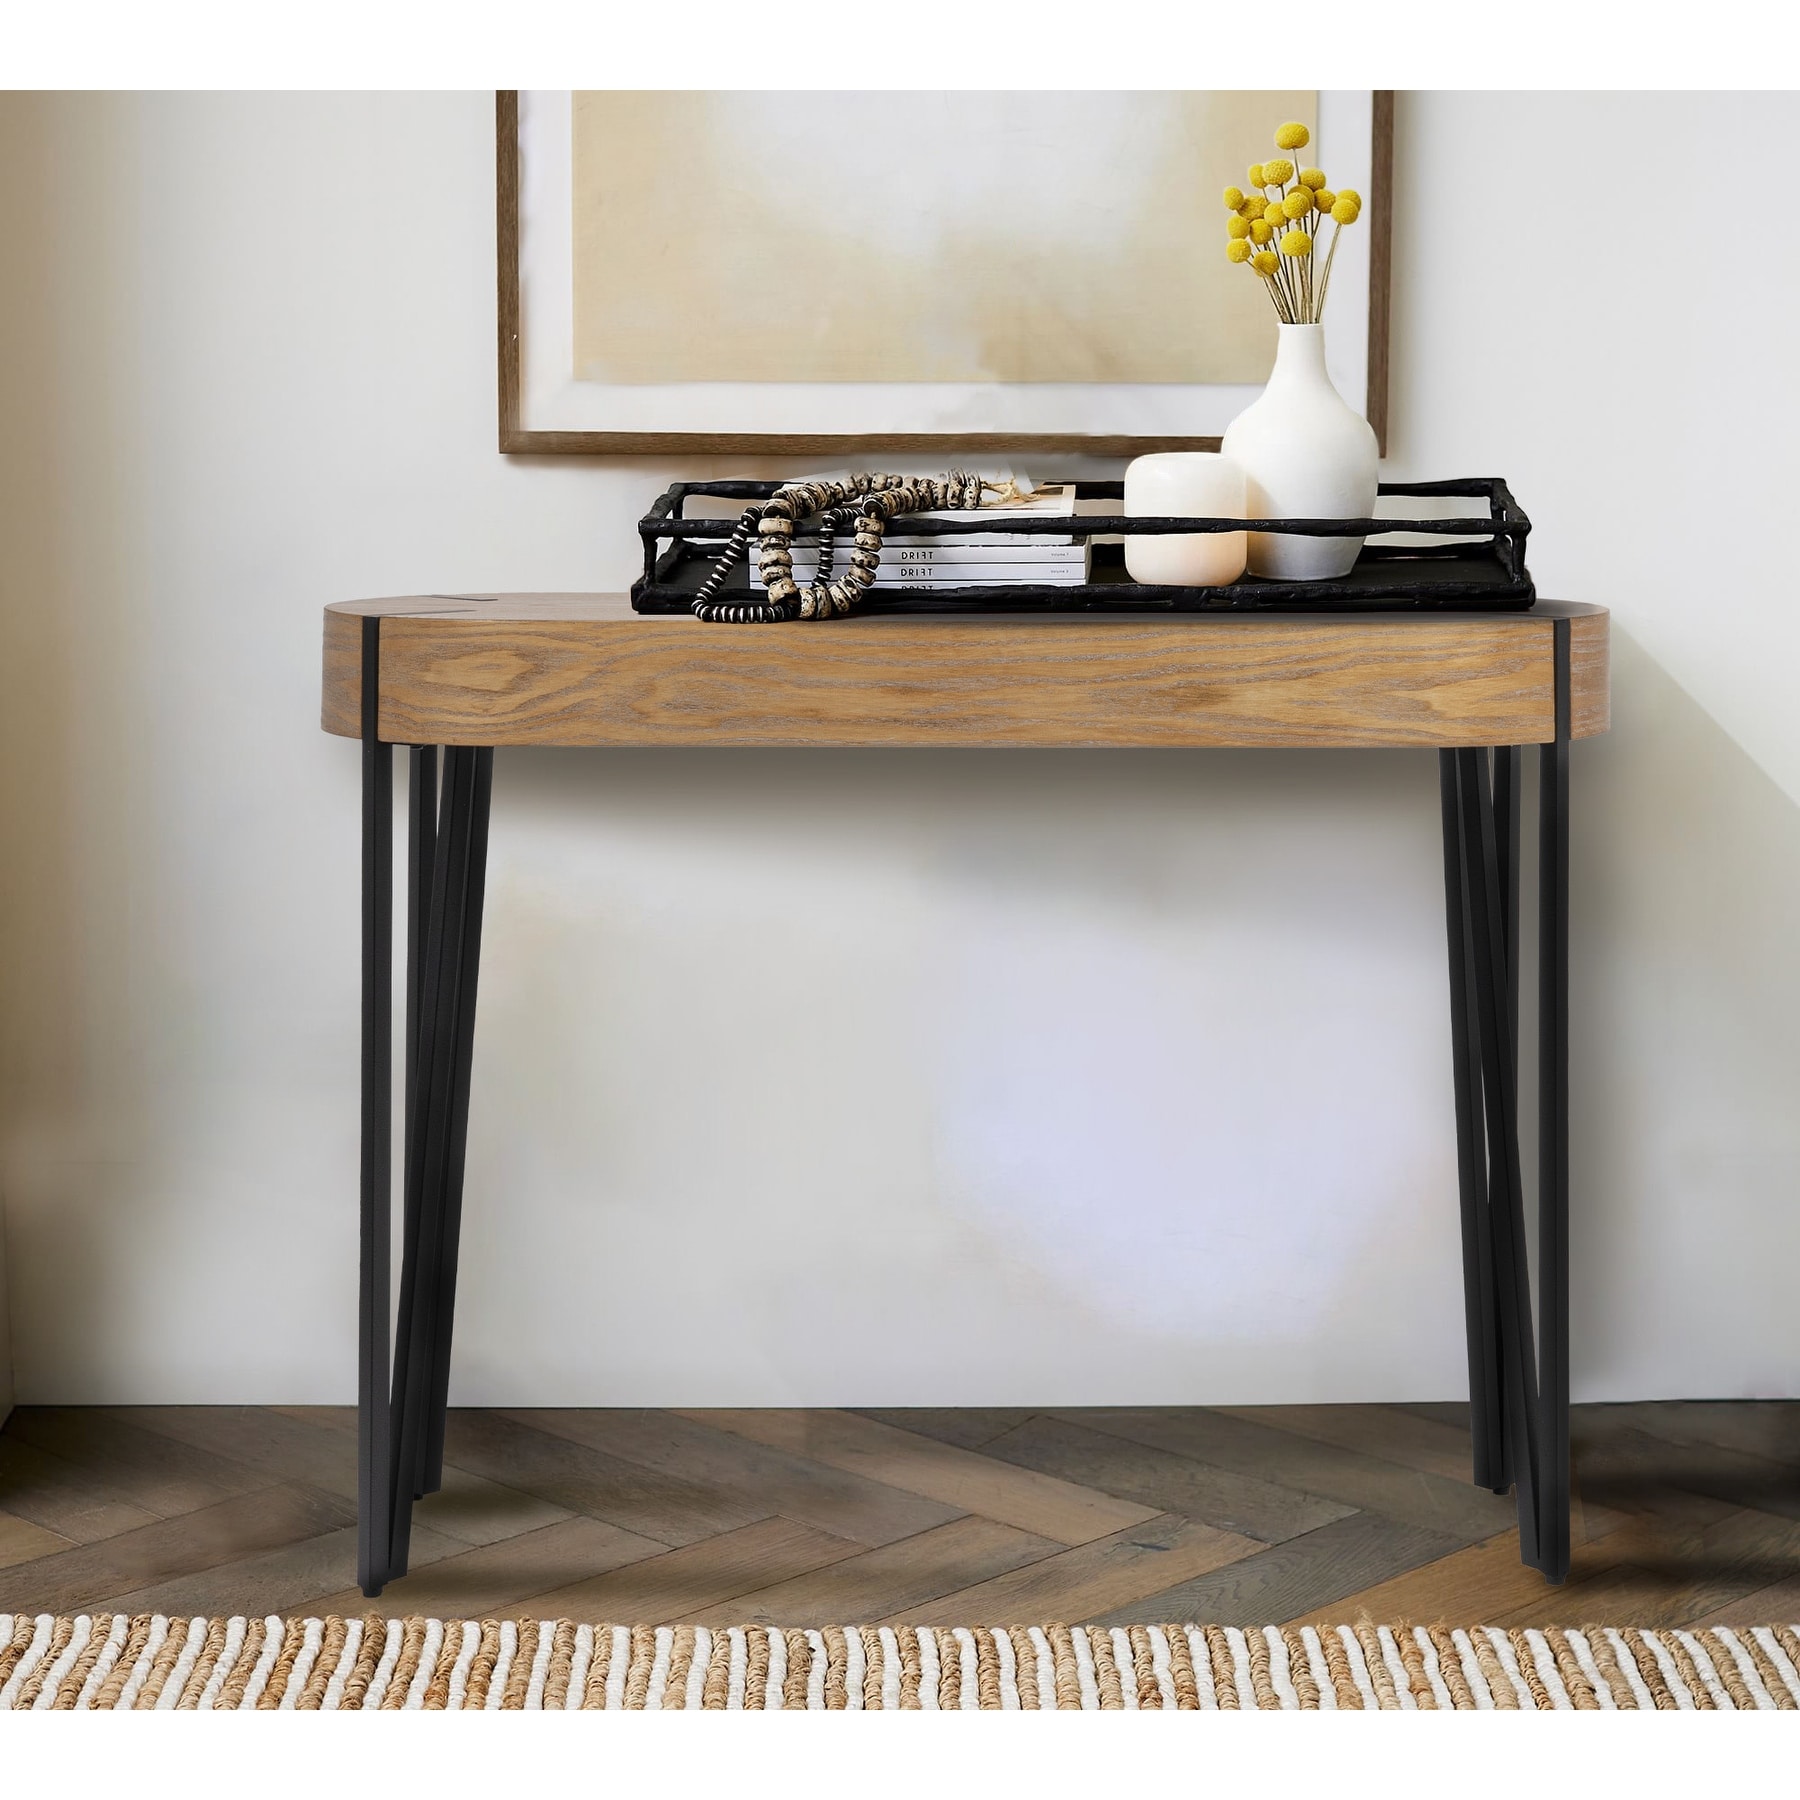 Astoria Wood Console Table with Metal Hairpin Legs - 42.0"L x 14.0"W x 30.3"H